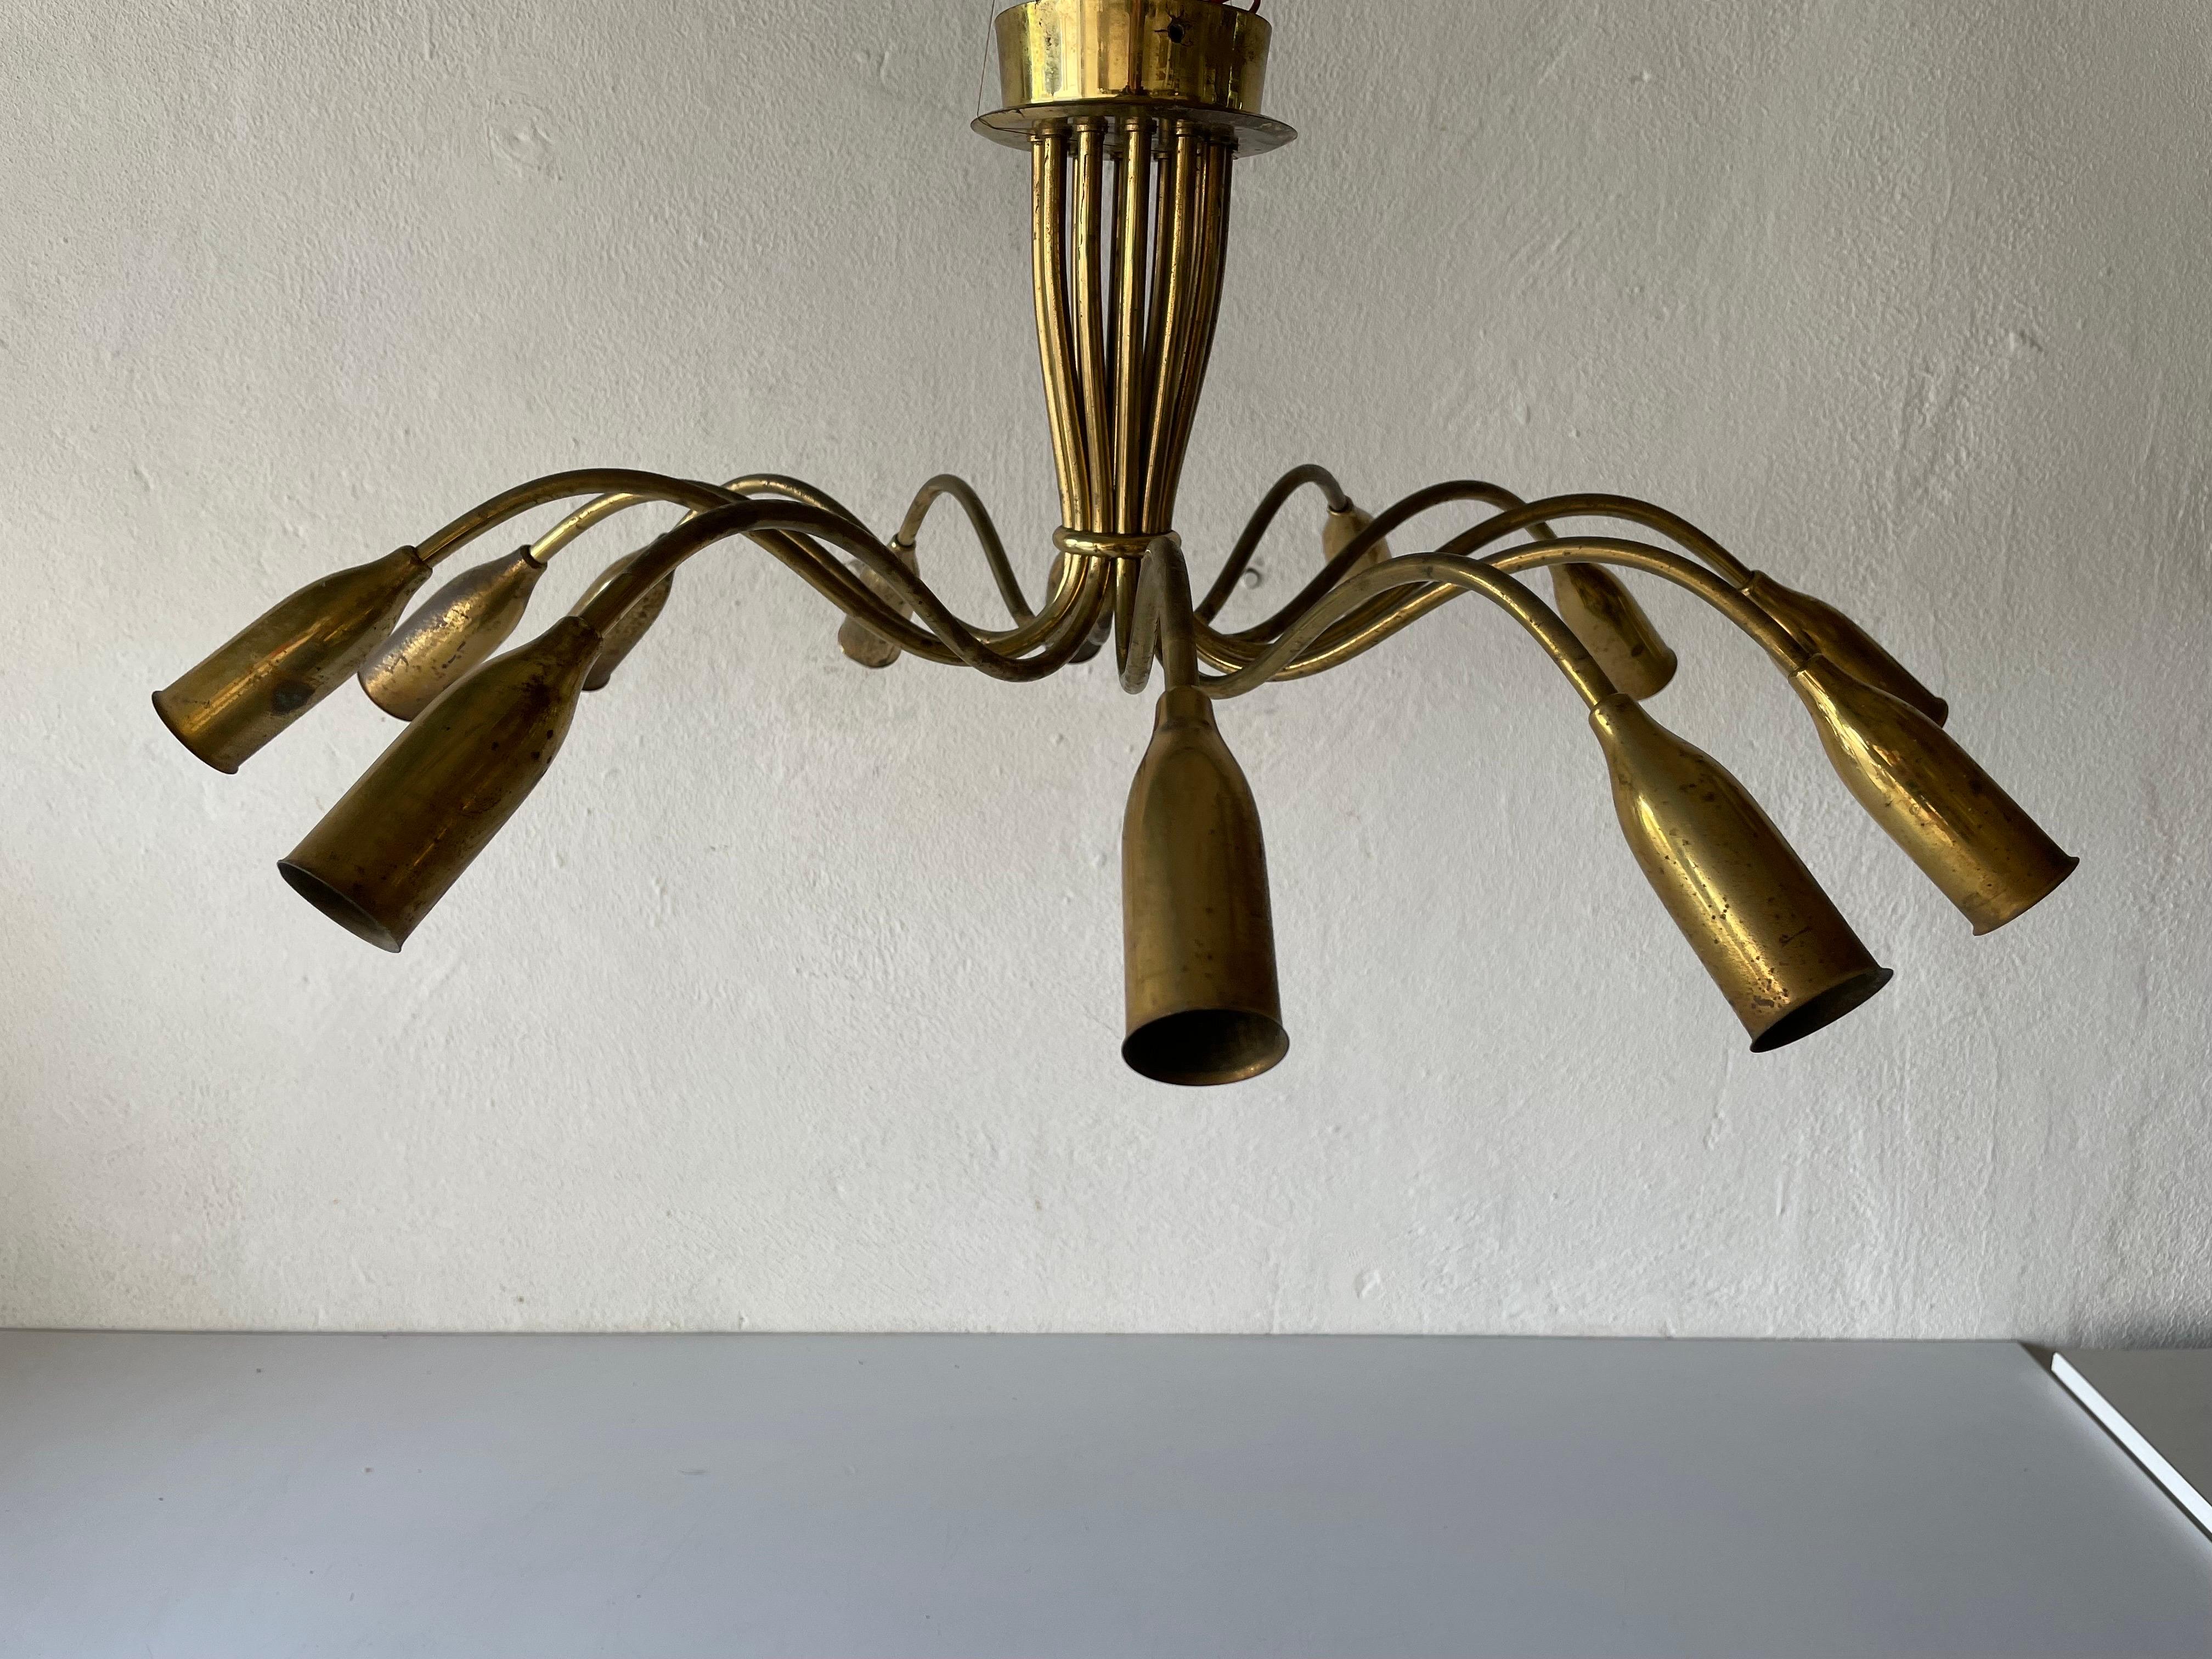 Mid-Century full brass 12-armed sputnik chandelier, 1950s, Germany.
Lampshade is in good condition and very clean. 

This lamp works with 12x E14 light bulbs. 
Wired and suitable to use with 220V and 110V for all countries.

Measures: